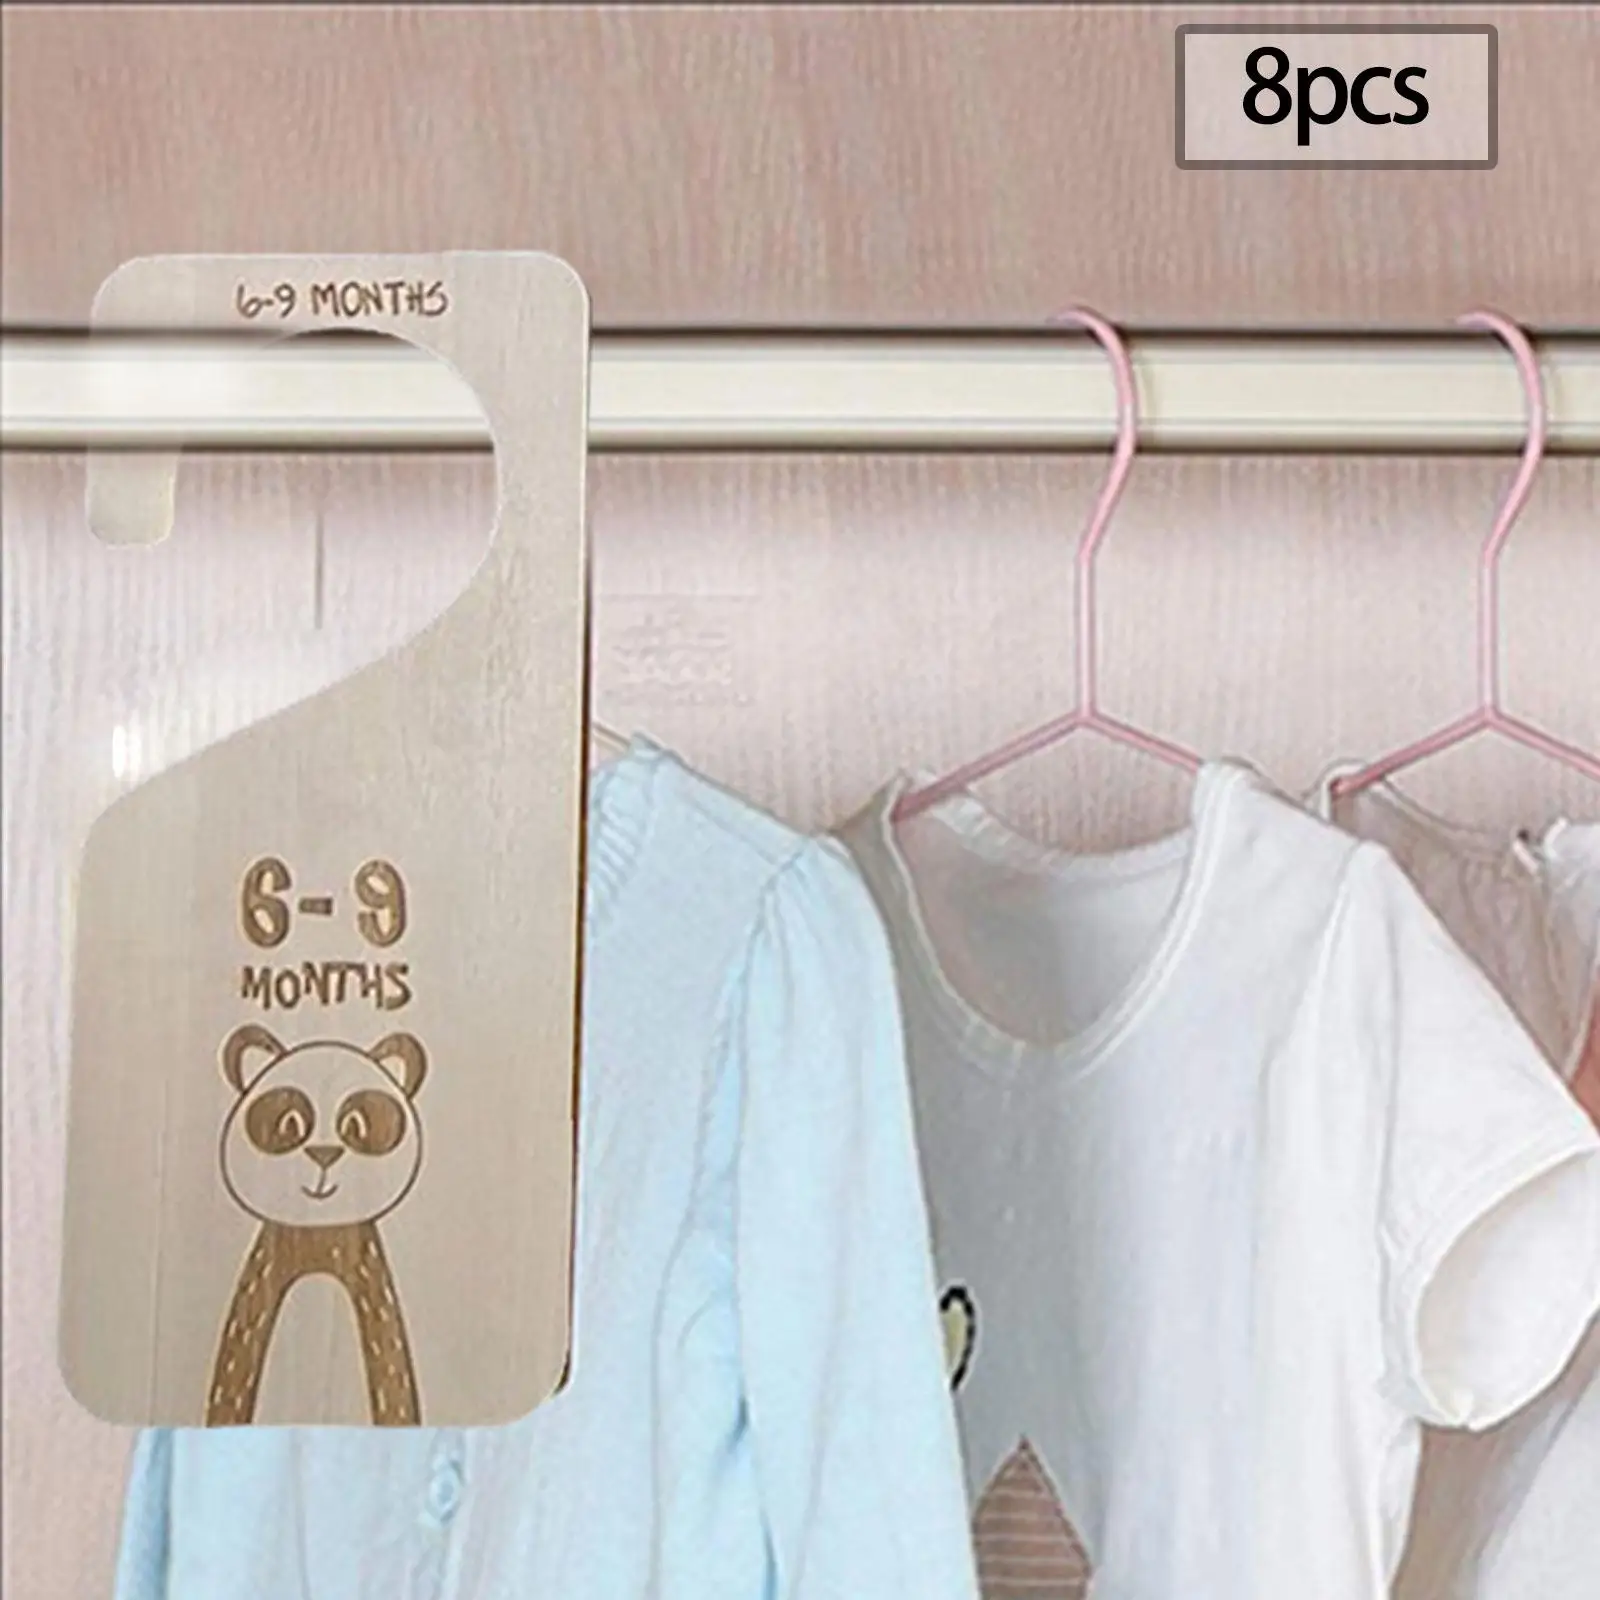 7x Adorable Newborn Baby Toddler Clothes Dividers Nursery Clothes Organizers Hanging Clothes Dividers for Closet Wardrobe